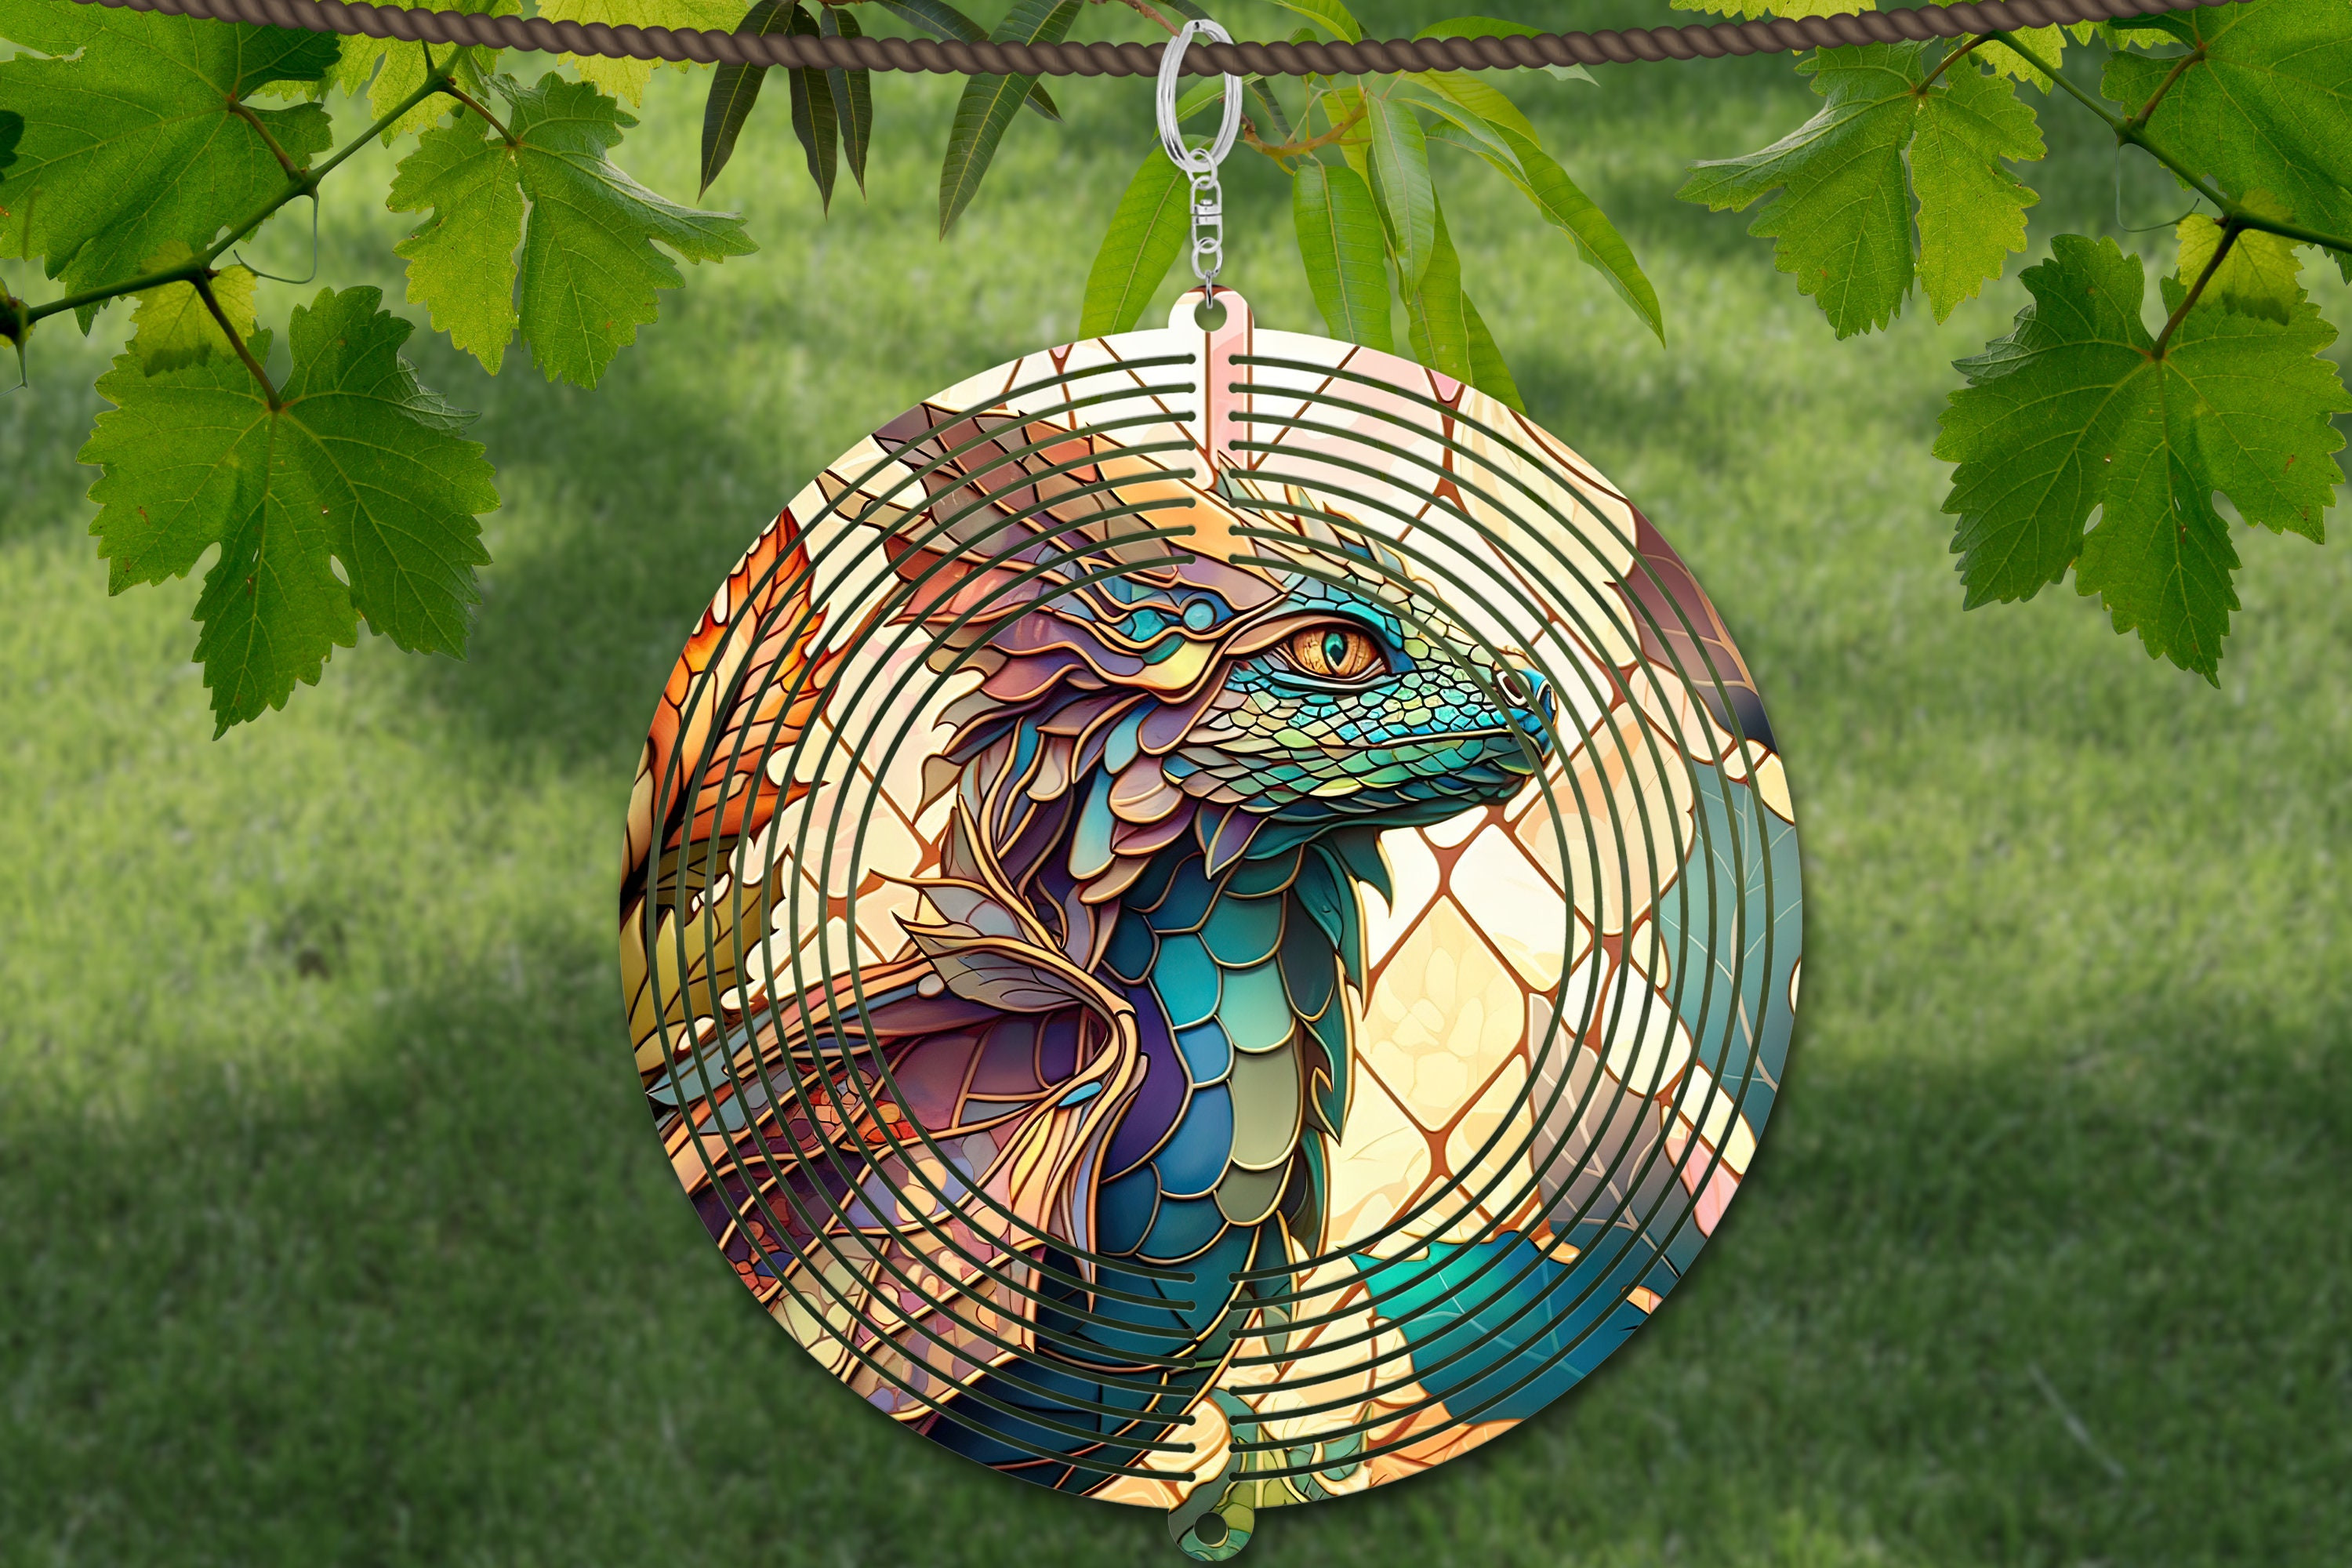 Dragon Wind Spinner For Yard And Garden Stained Glass, Outdoor Garden Yard Decoration, Garden Decor, Chime Art Gift